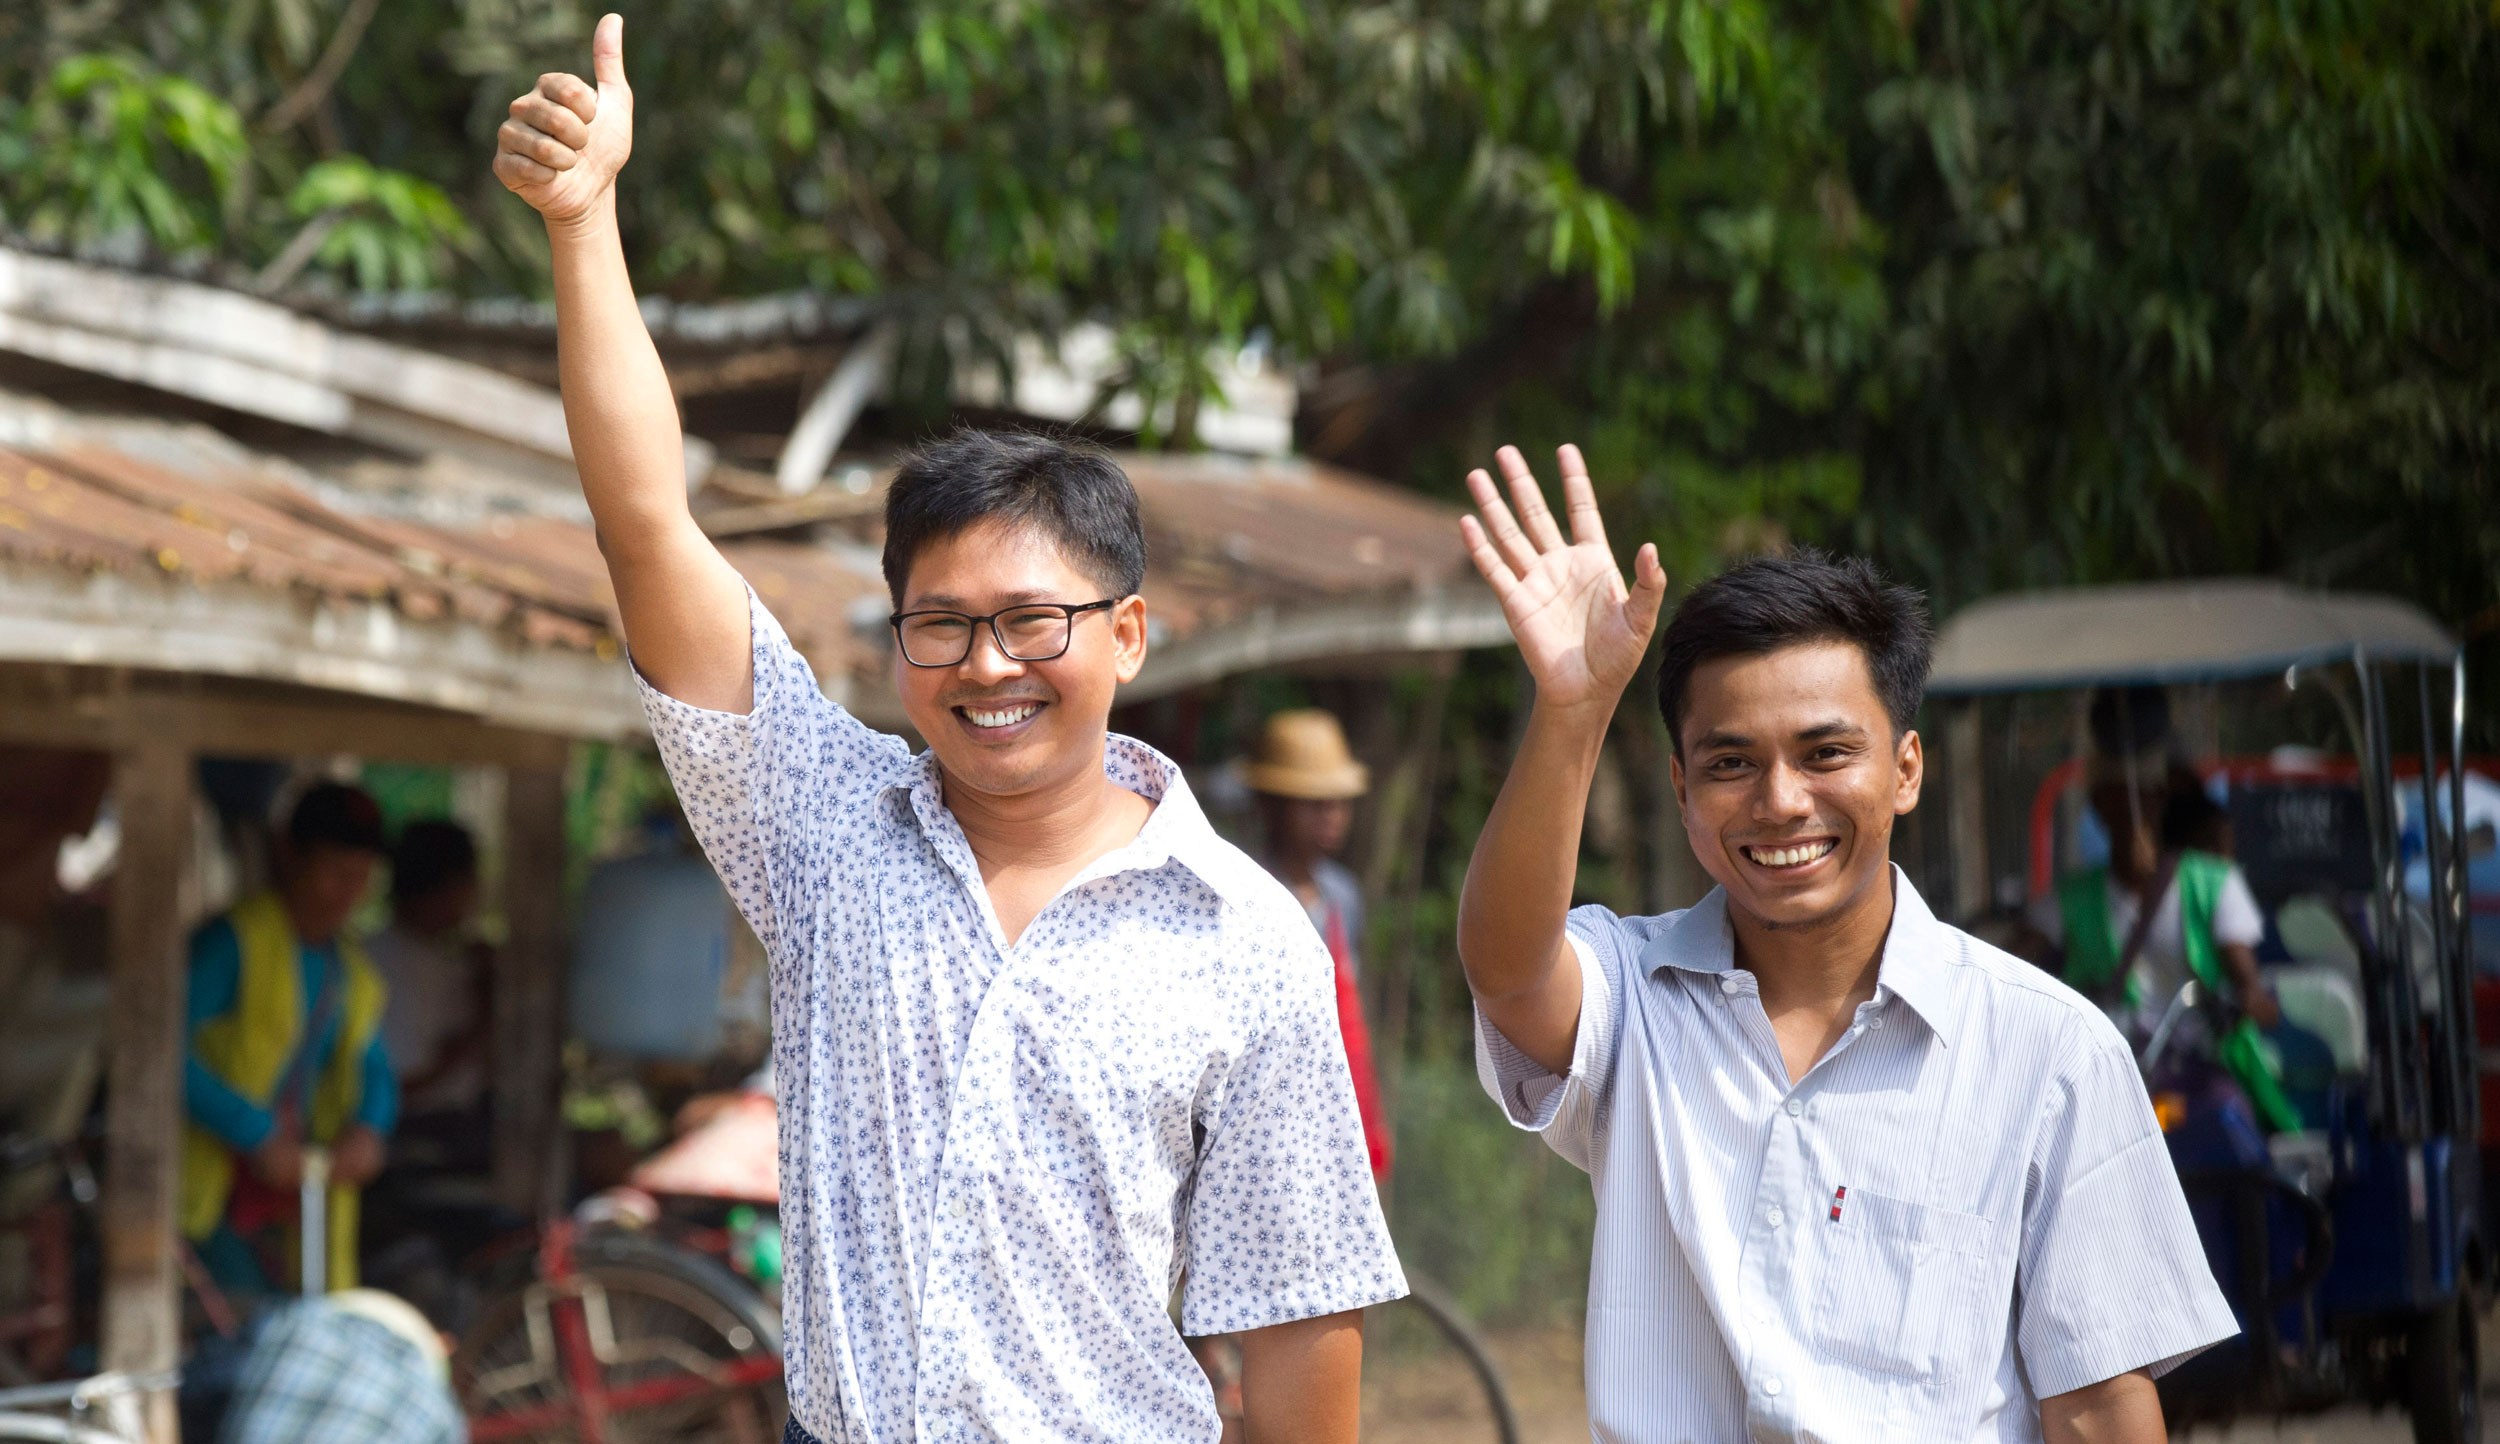 Reuters journalists Wa Lone (left) and Kyaw She Oo wave as they walk out from Insein Prison in Yangon, Myanmar on May 7, 2019. 